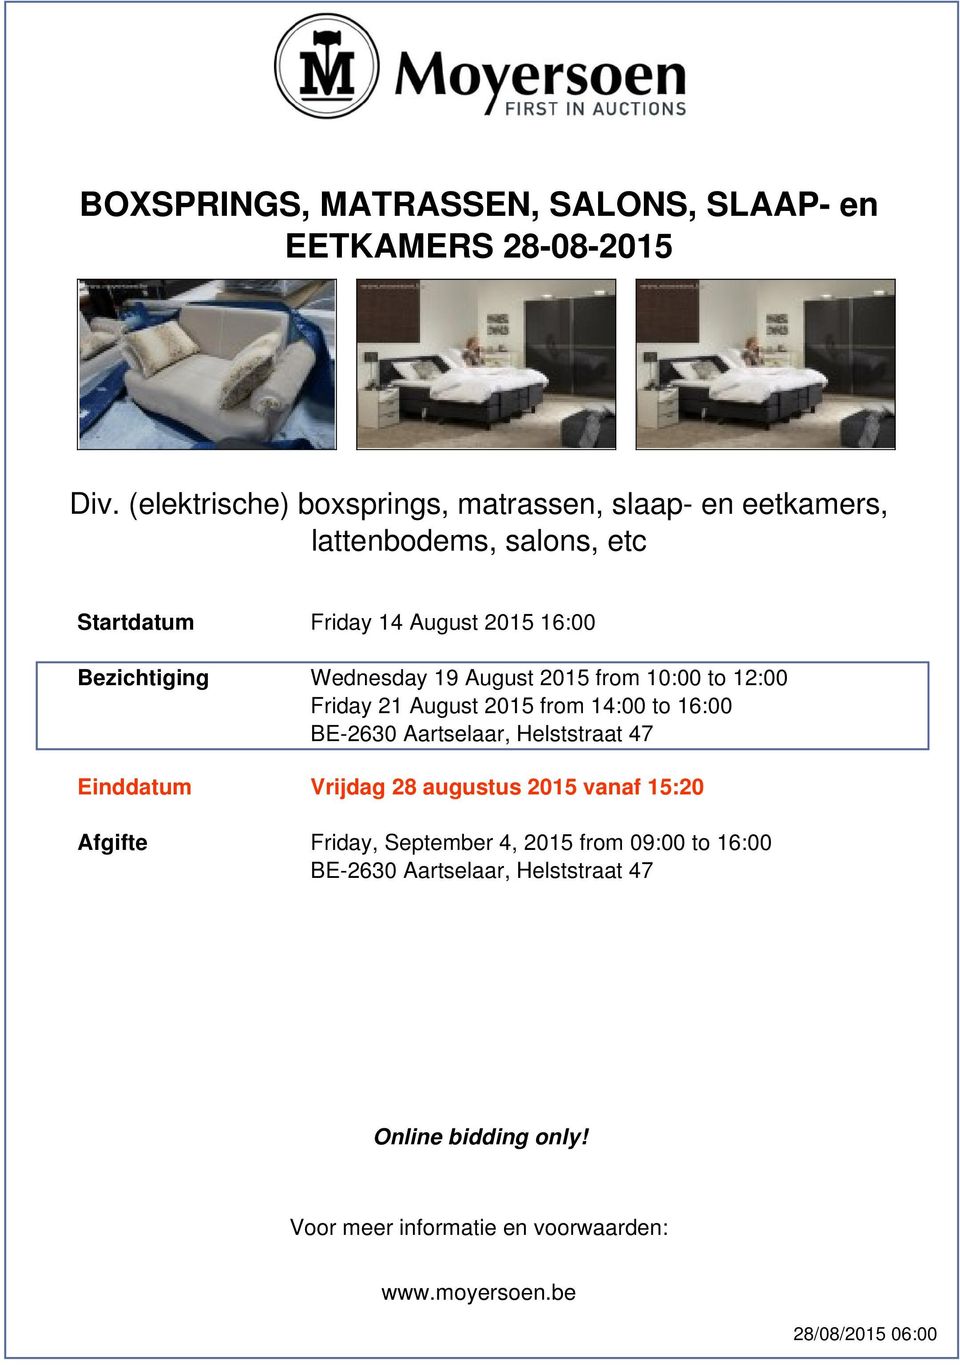 Wednesday 19 August 2015 from 10:00 to 12:00 Friday 21 August 2015 from 14:00 to 16:00 BE-2630 Aartselaar, Helststraat 47 Einddatum